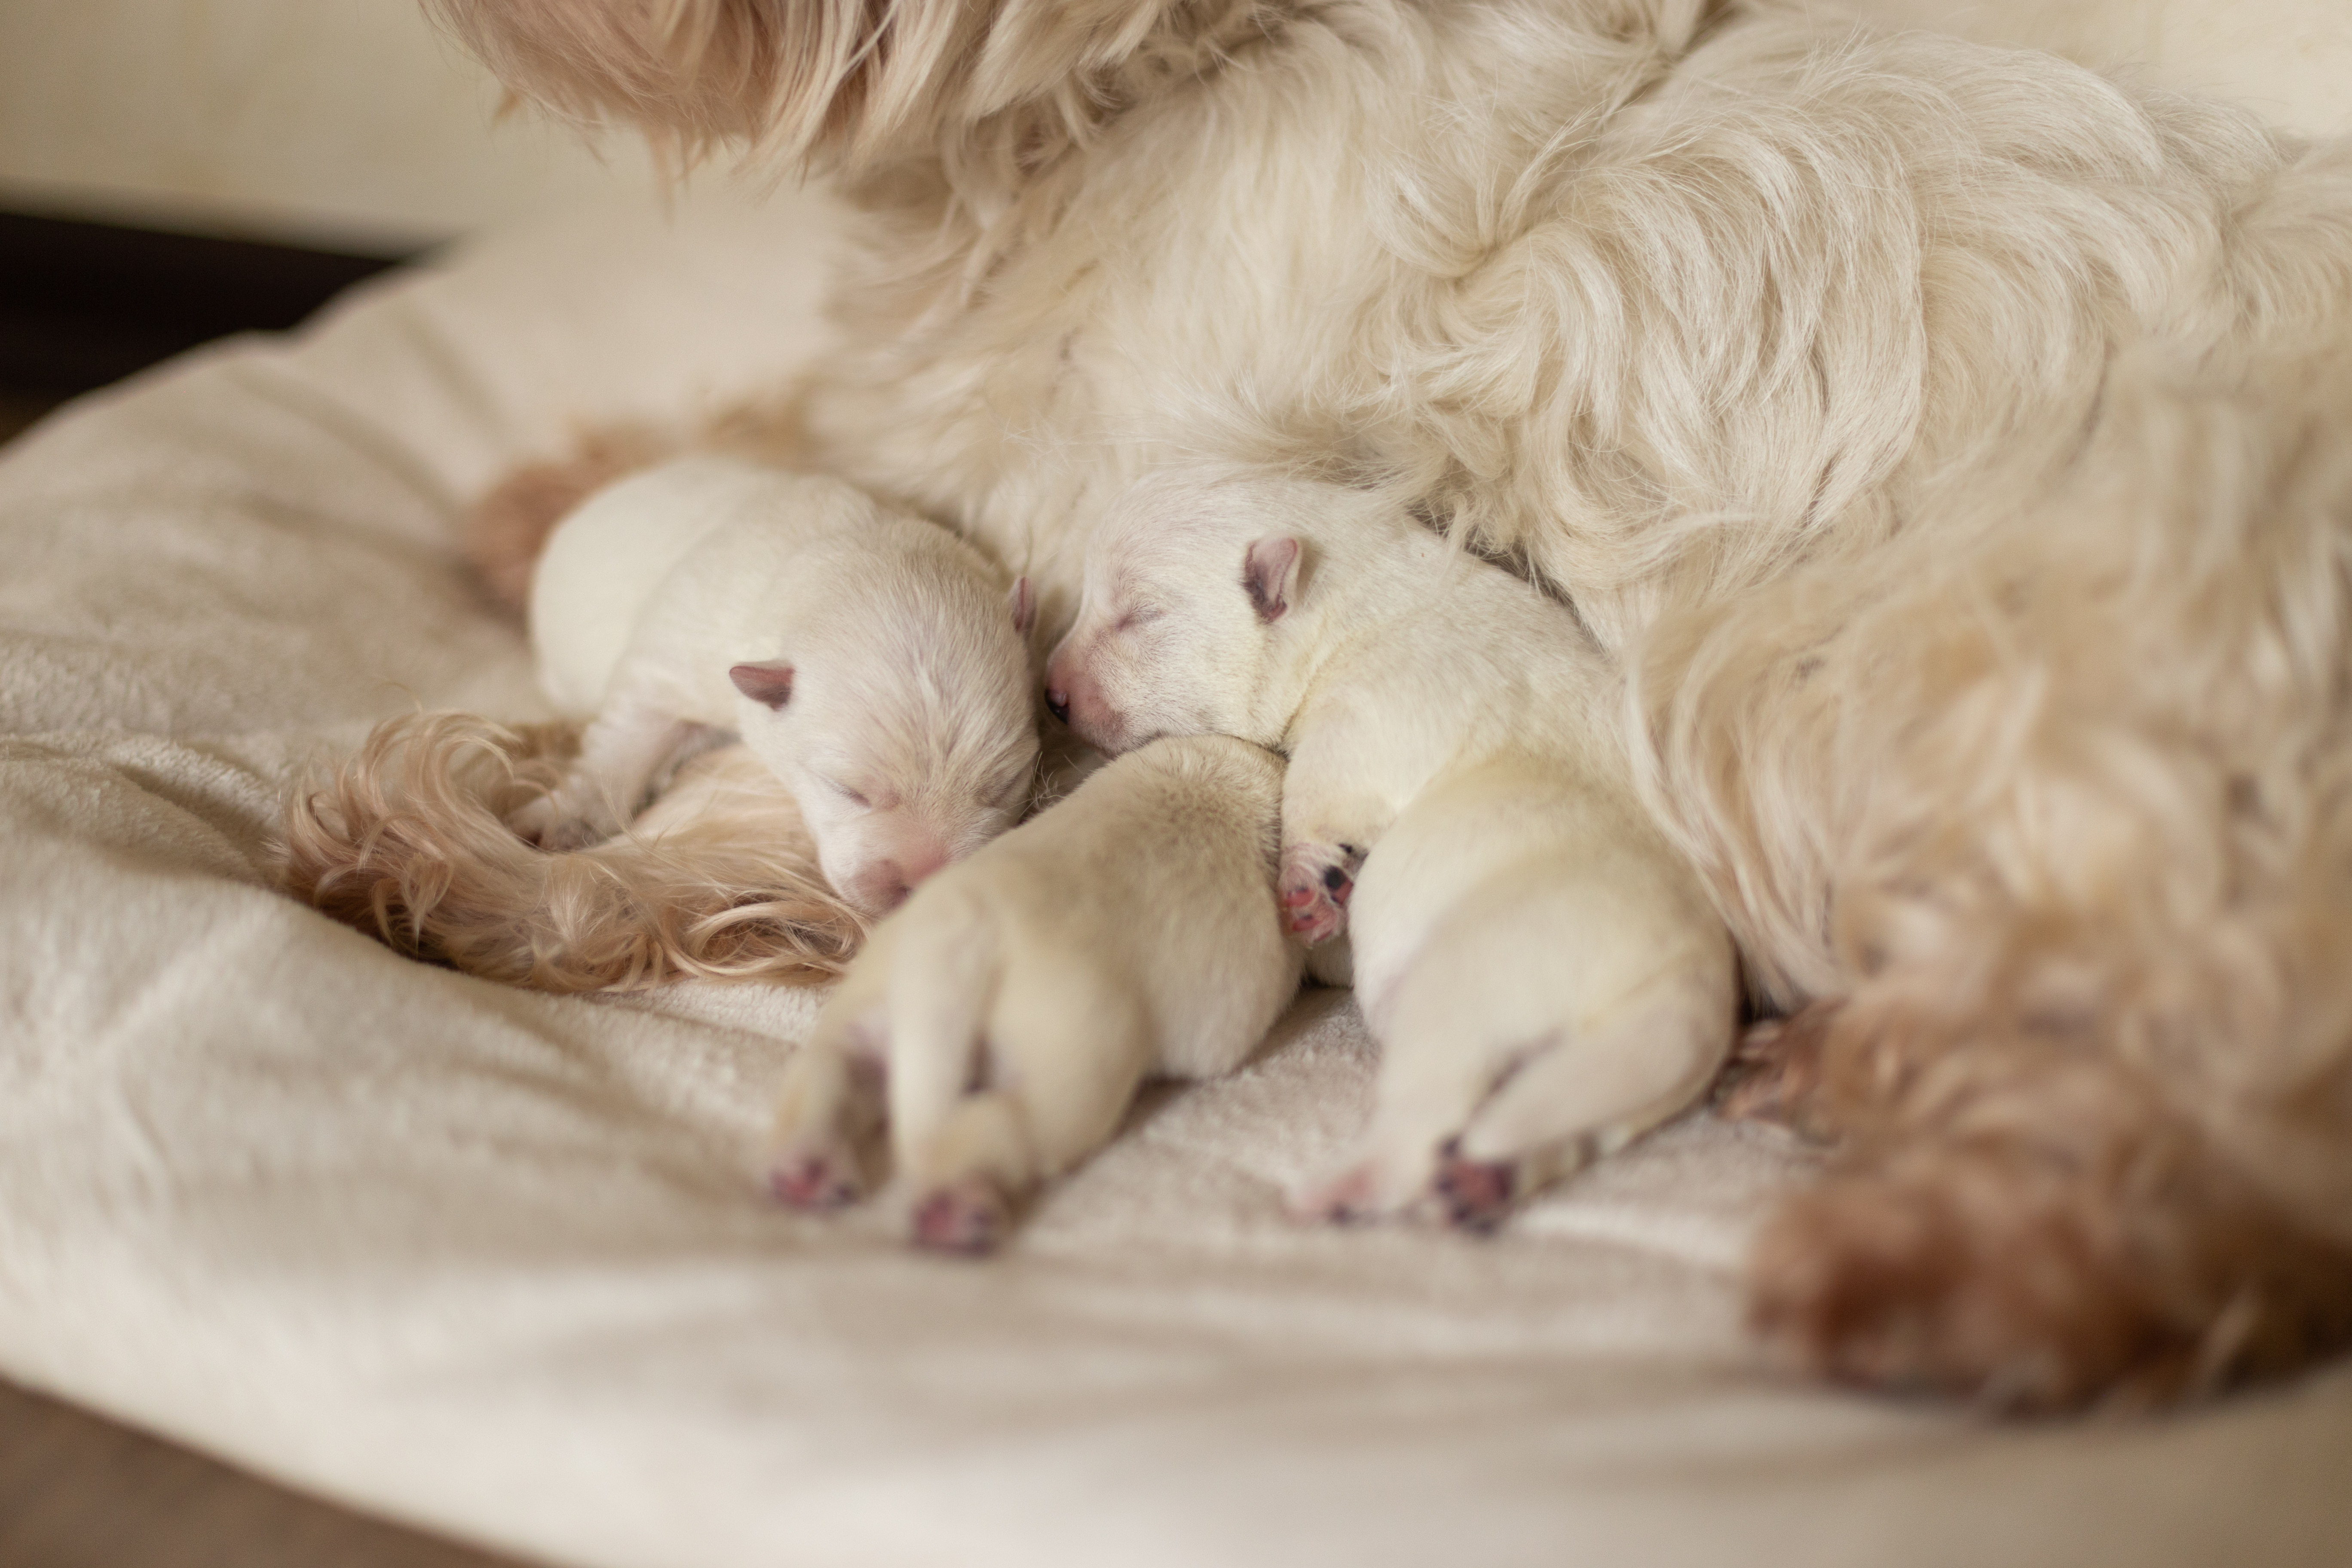 what should i do after my dog gives birth